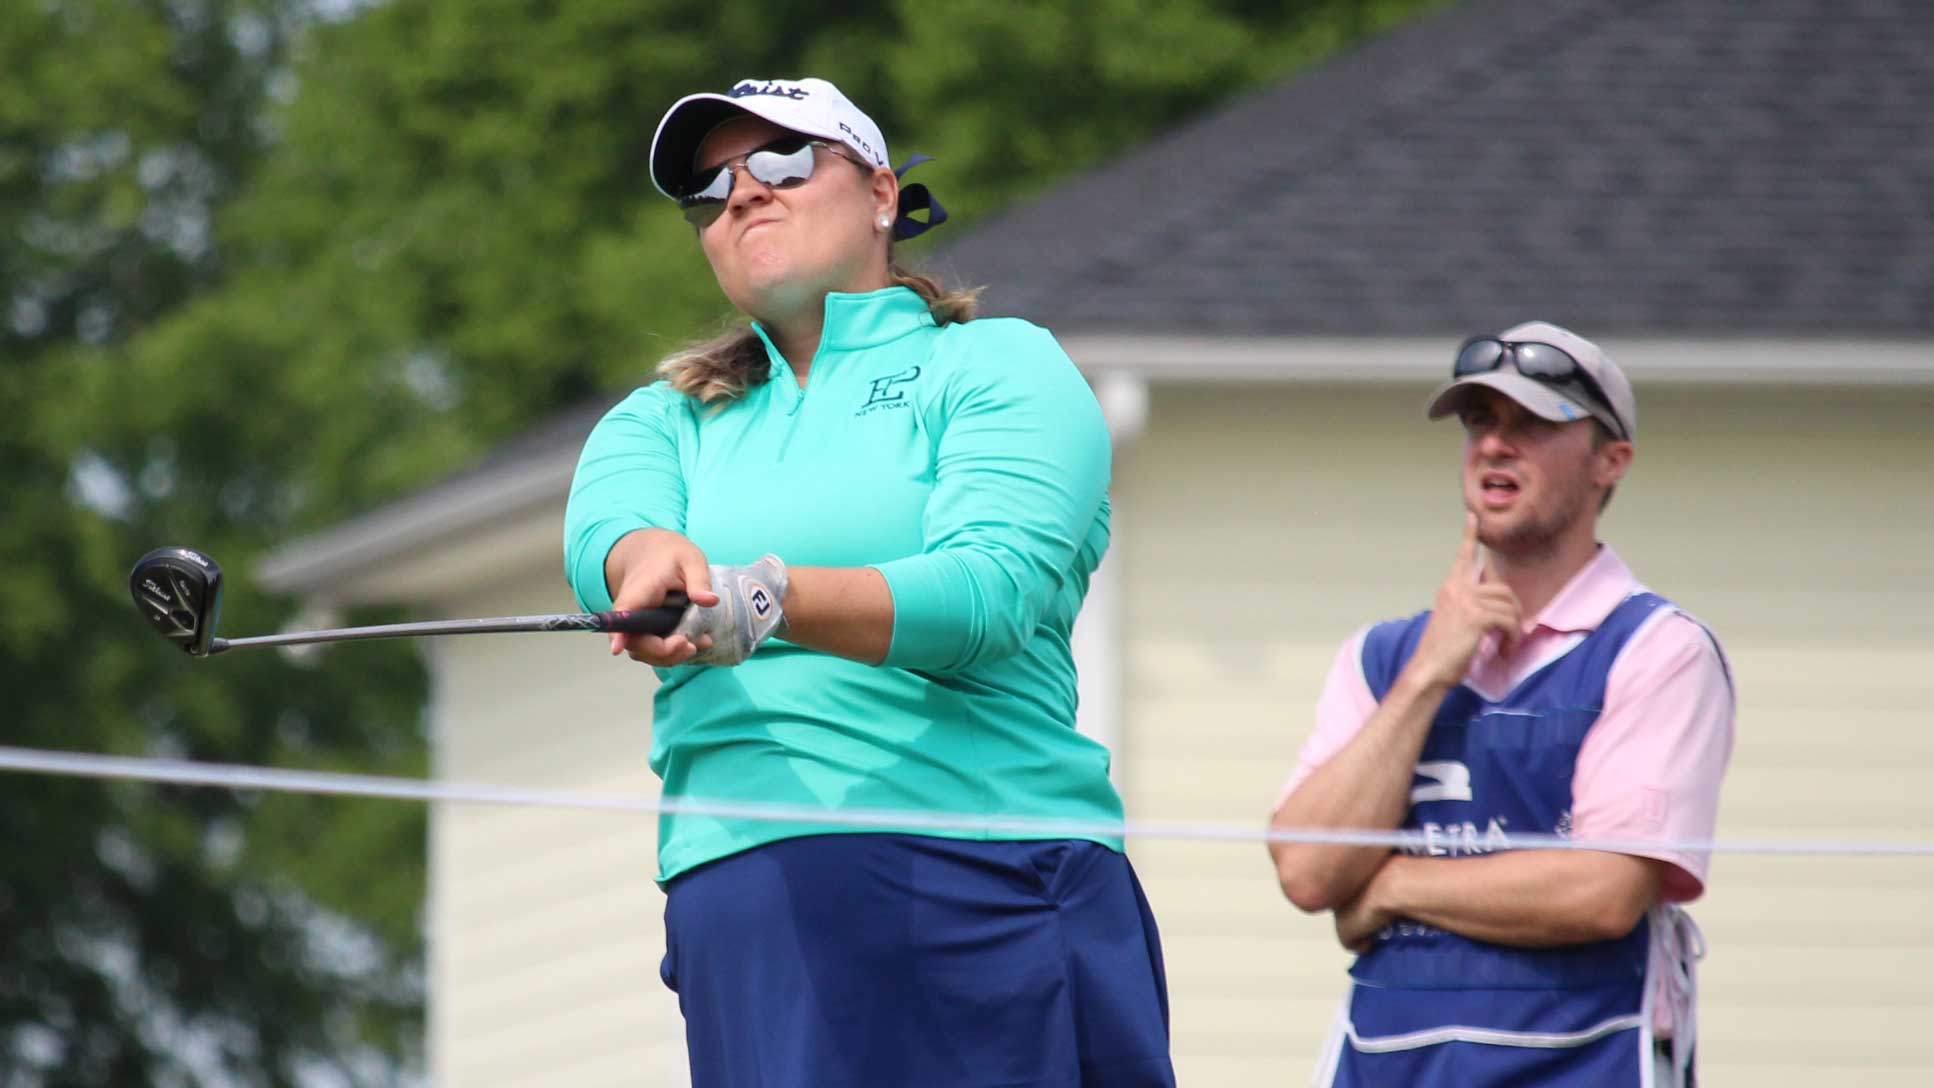 Liz Nagel and caddie at the 2017 Womens Health Classic. Photo courtesy: Symetra Tour